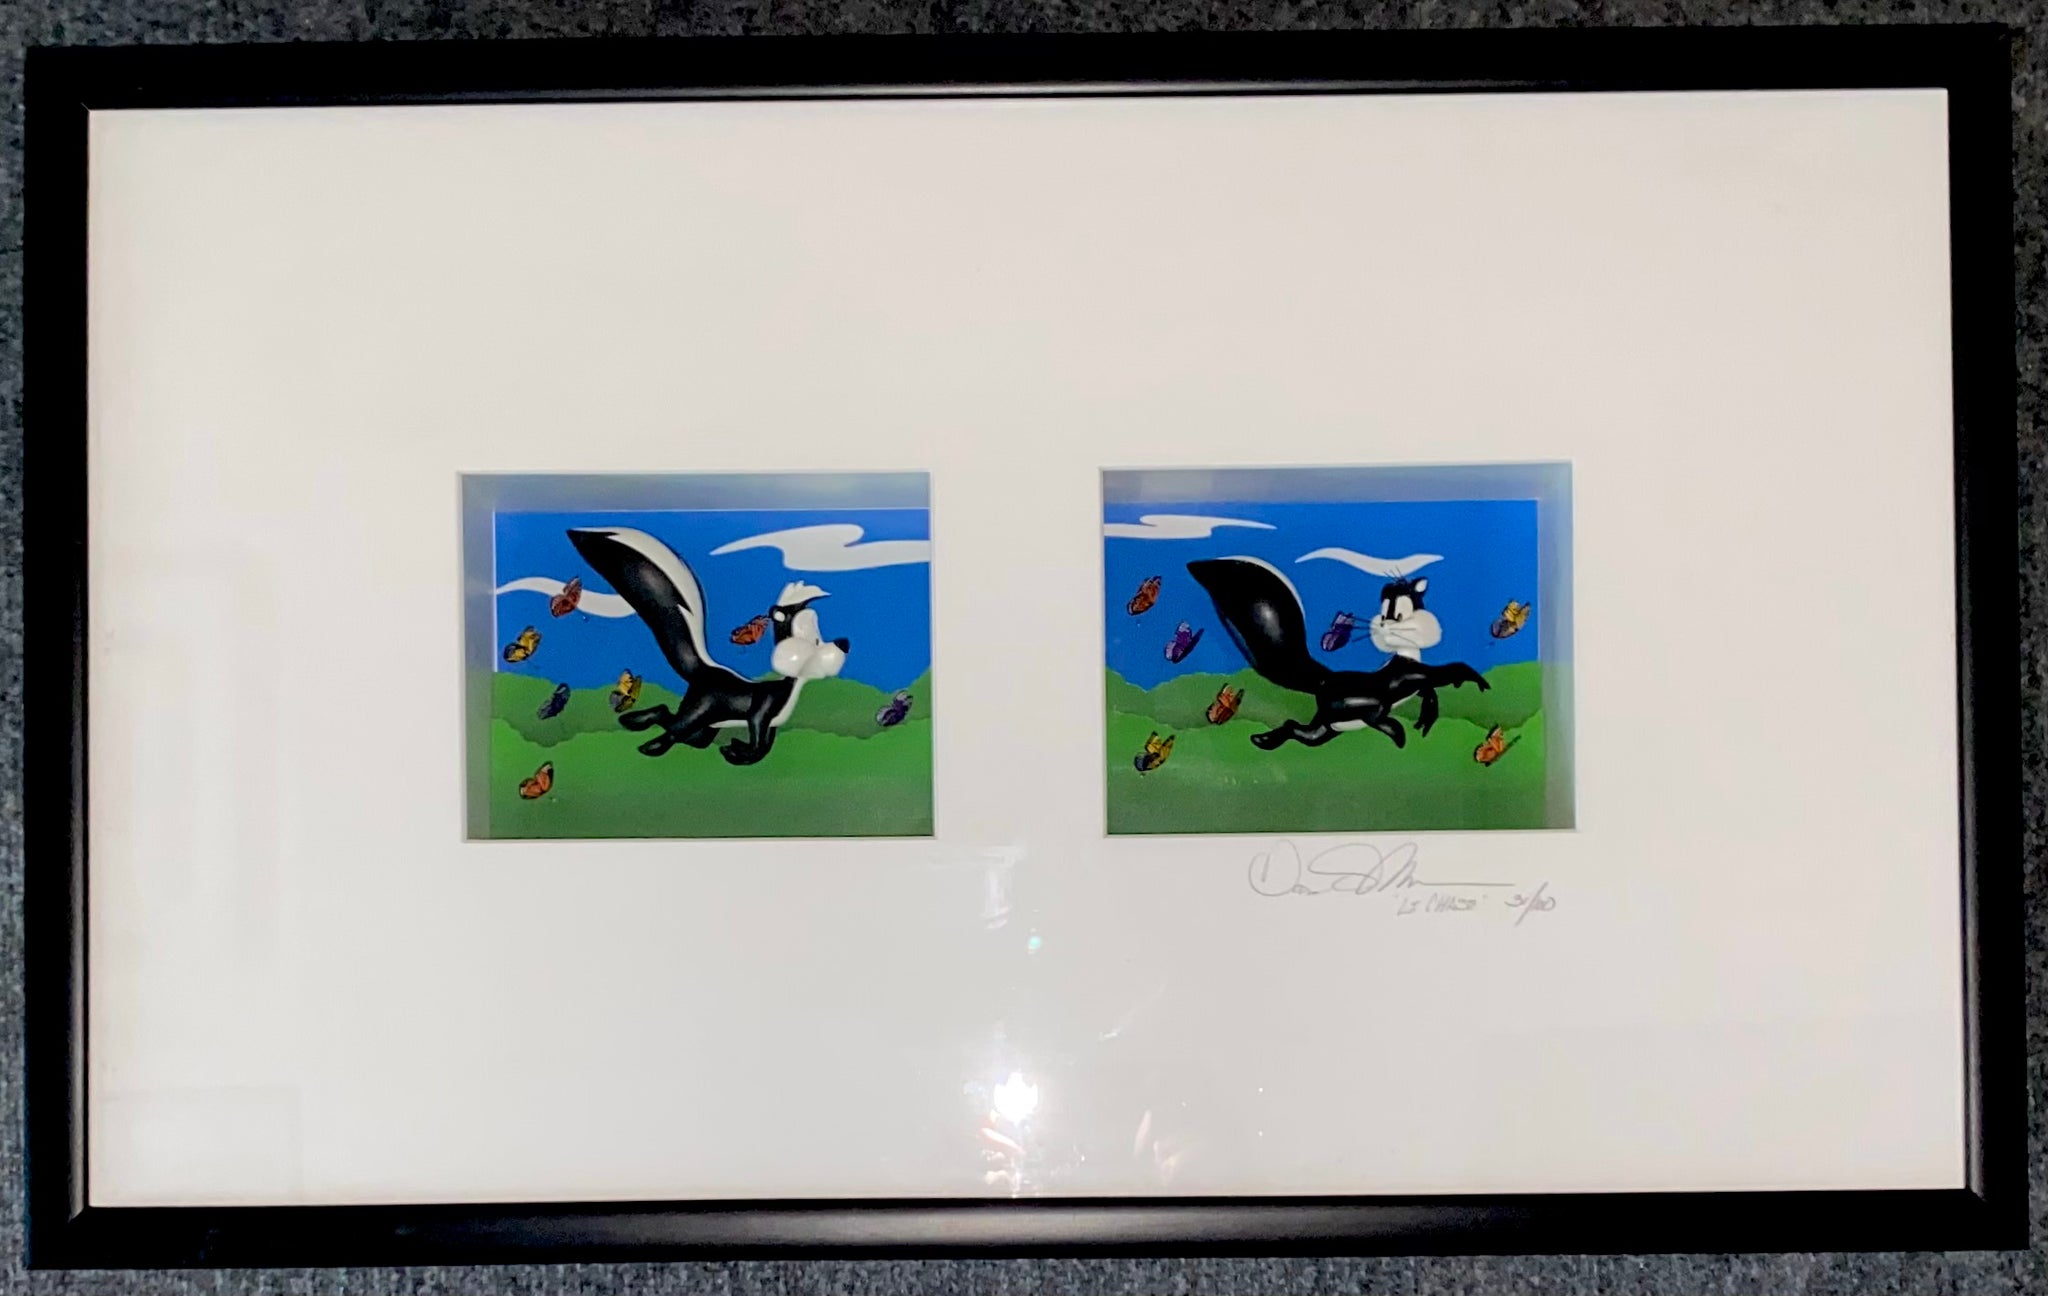 Le Chase - By David Kracov Featuring Pepe Le Pew and Penelope Pussycat